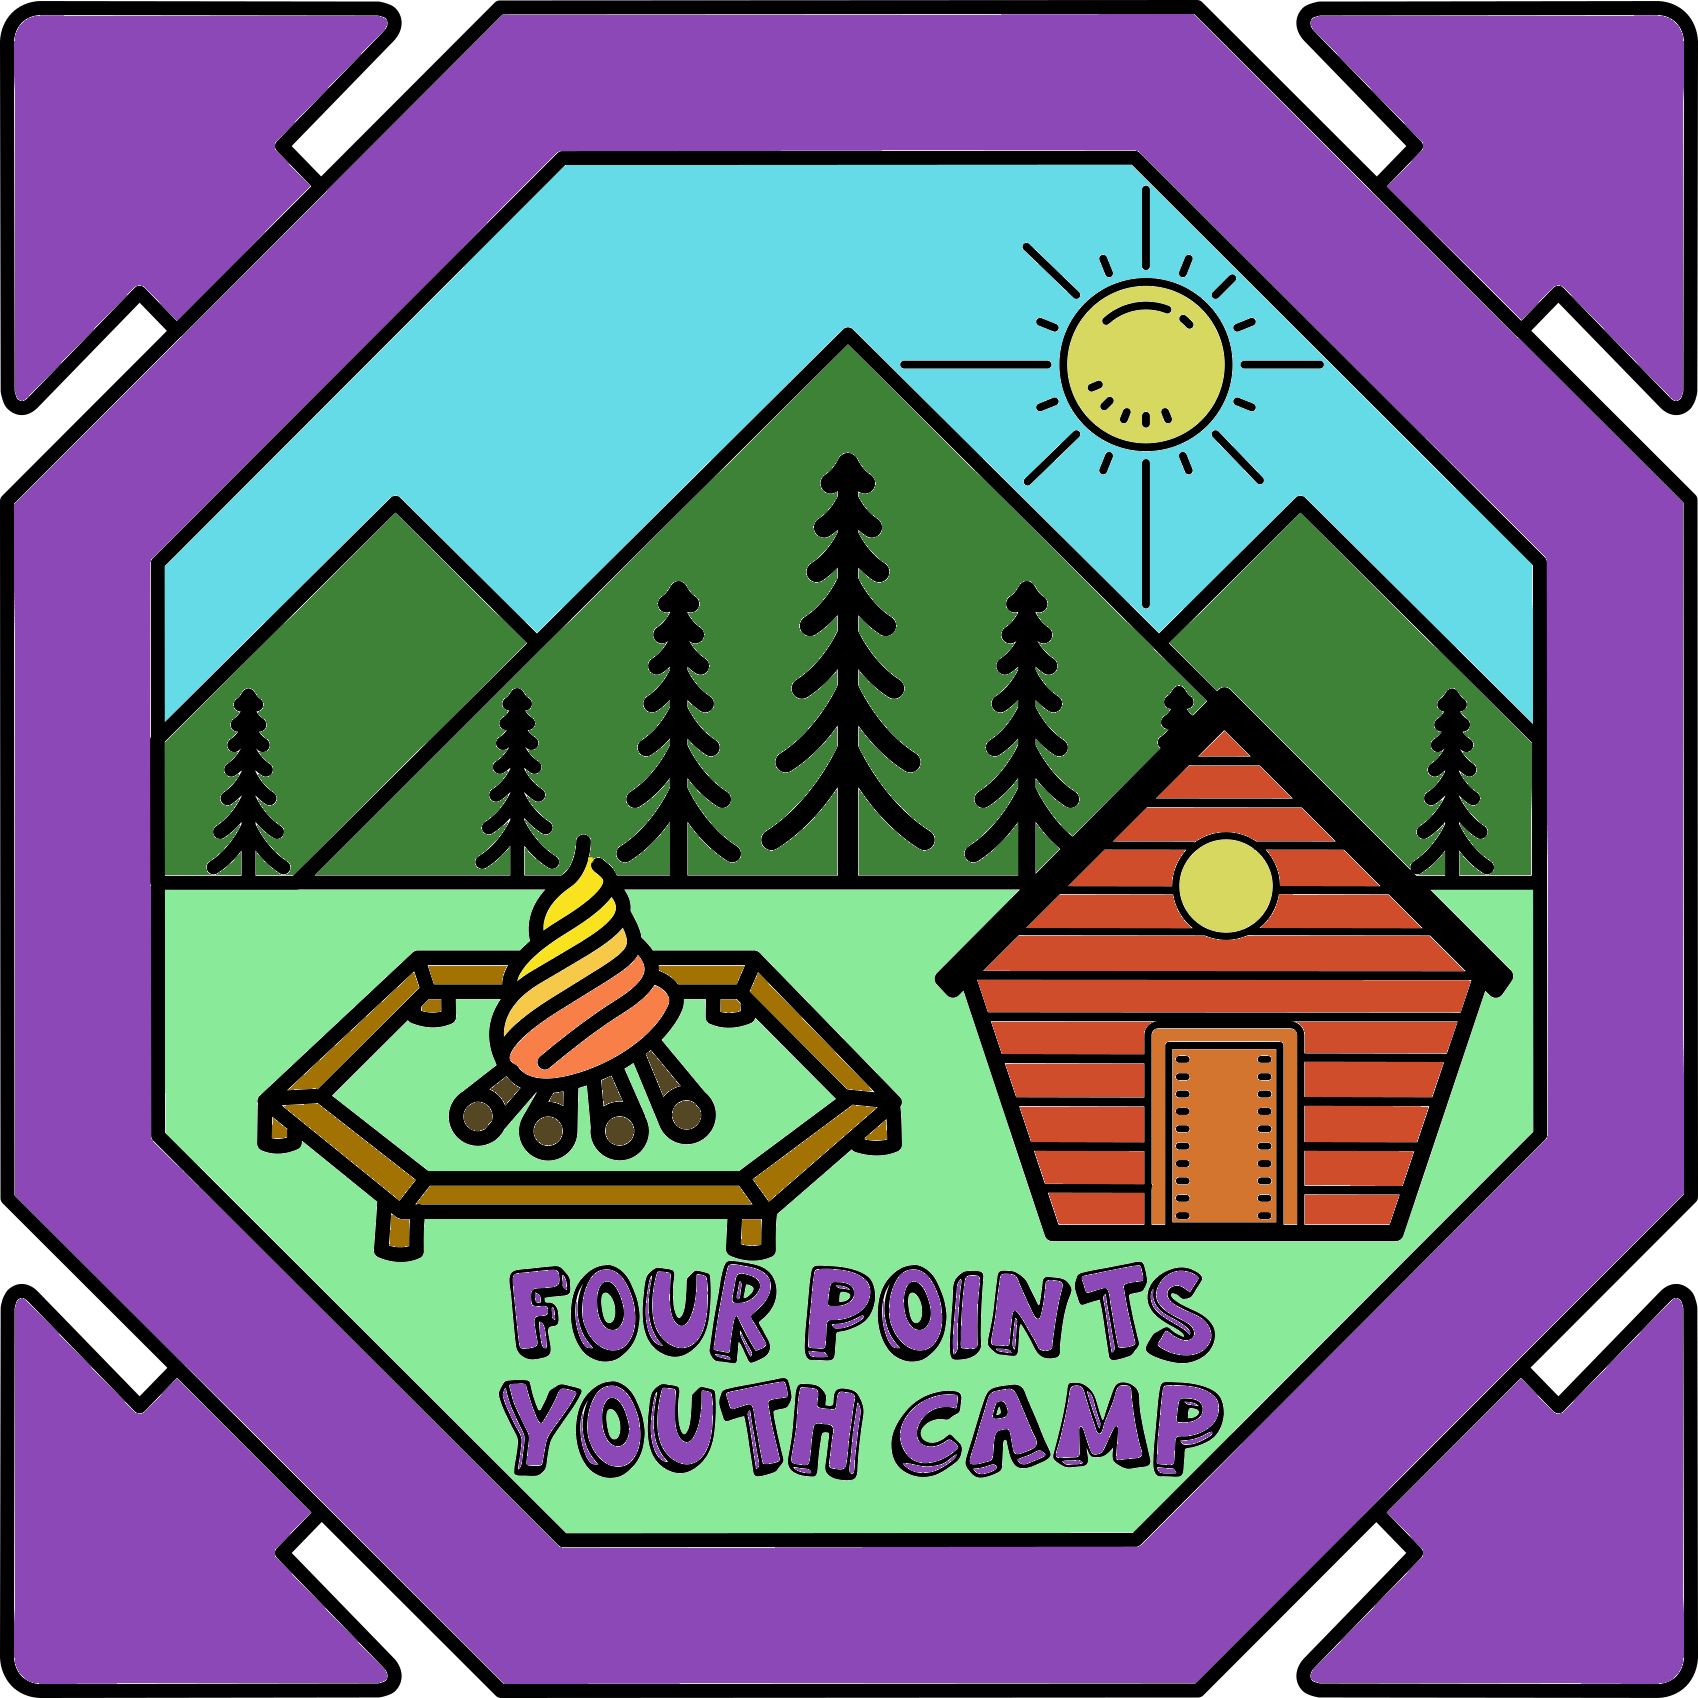 Four Points Youth Camp LLC